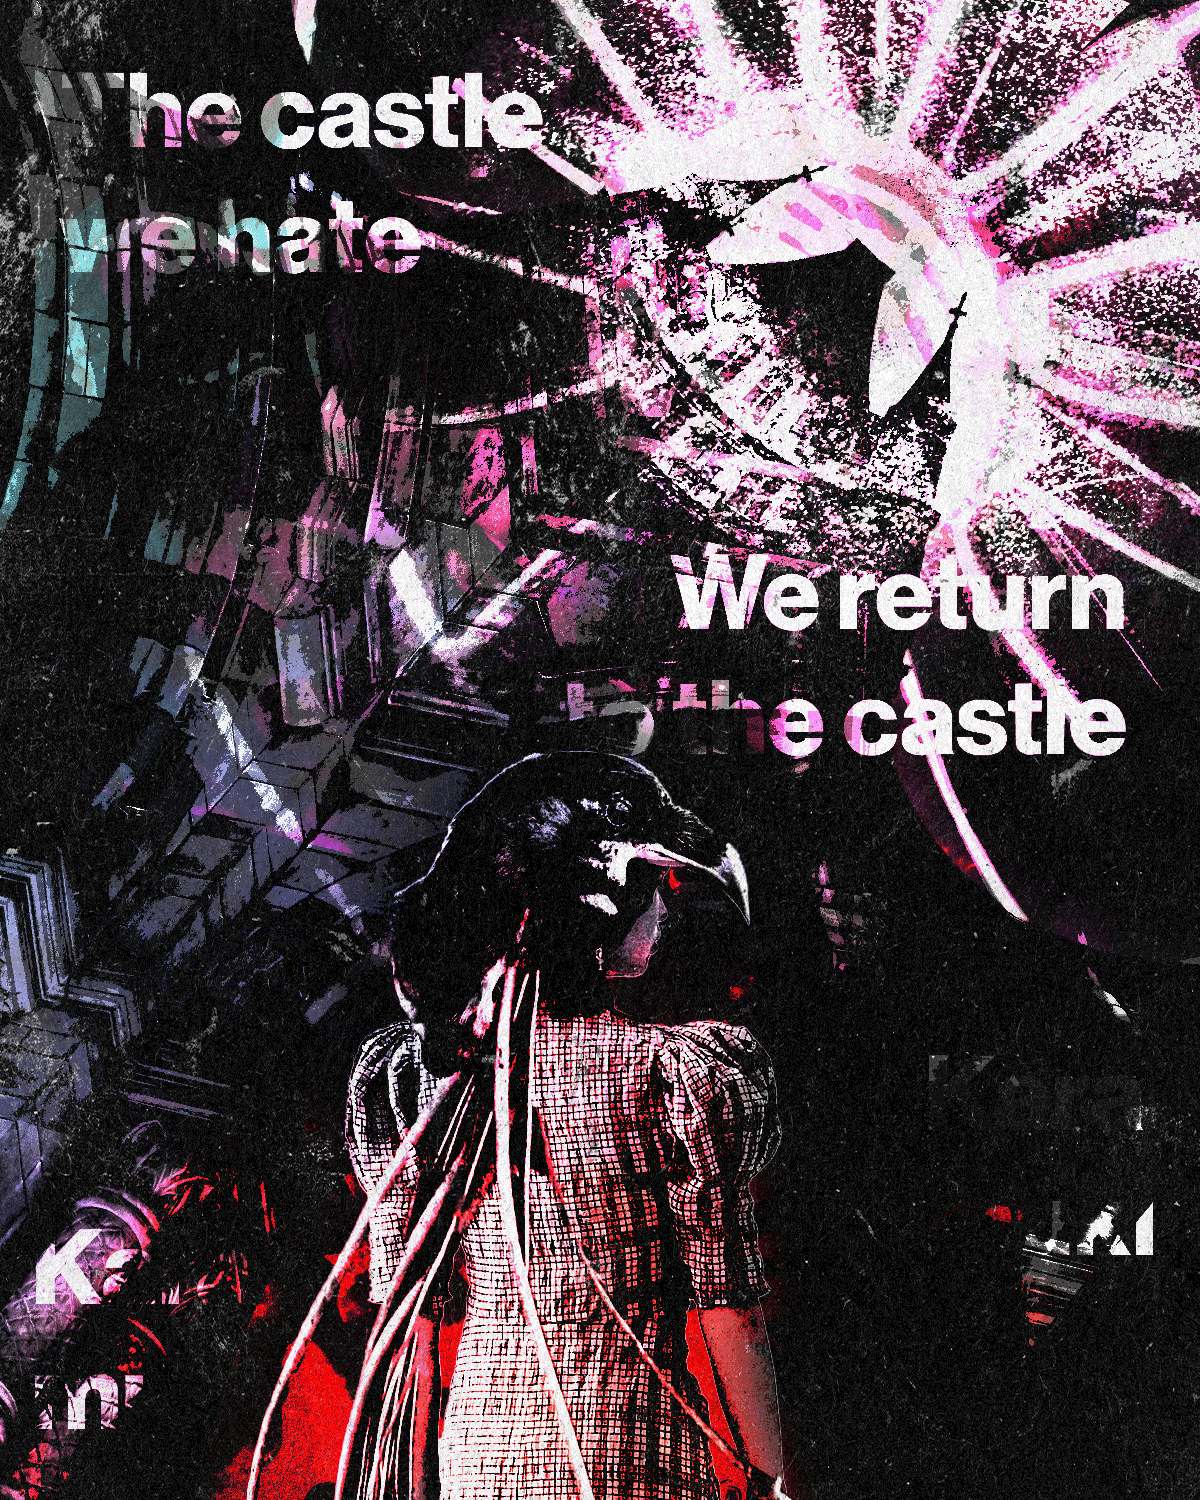 The castle we hate. We return to the castle.